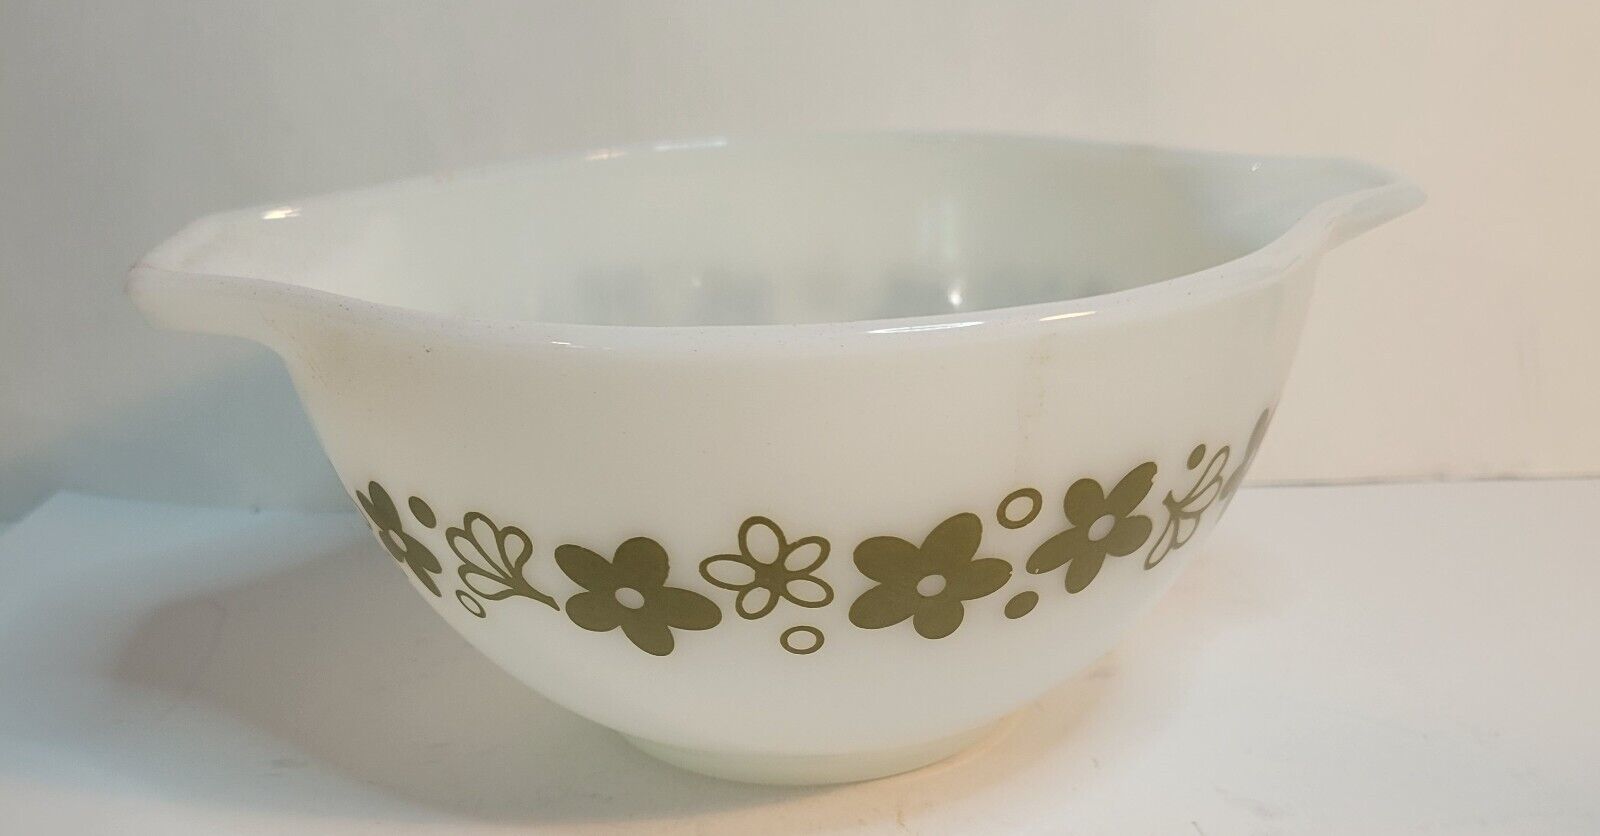 Primary image for VTG Pyrex No. 441 Cinderella Bowl 1.5 Pint Spring Blossom Crazy Daisy Pattern